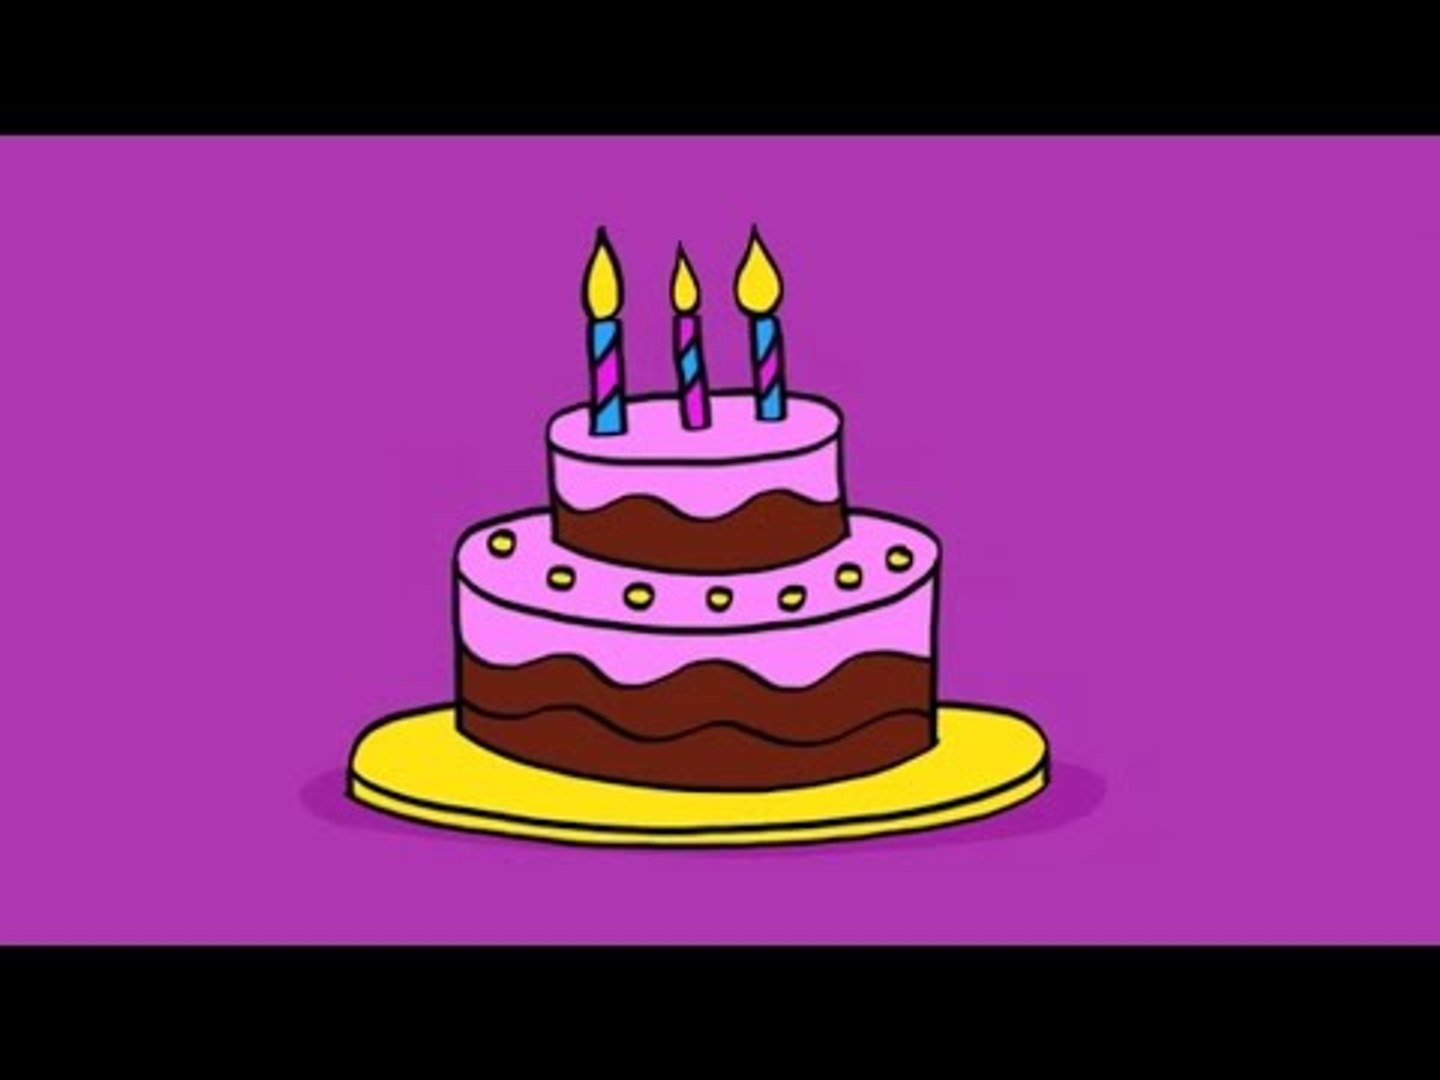 Apprendre A Dessiner Un Gateau D Anniversaire How To Draw A Birthday Cake Video Dailymotion